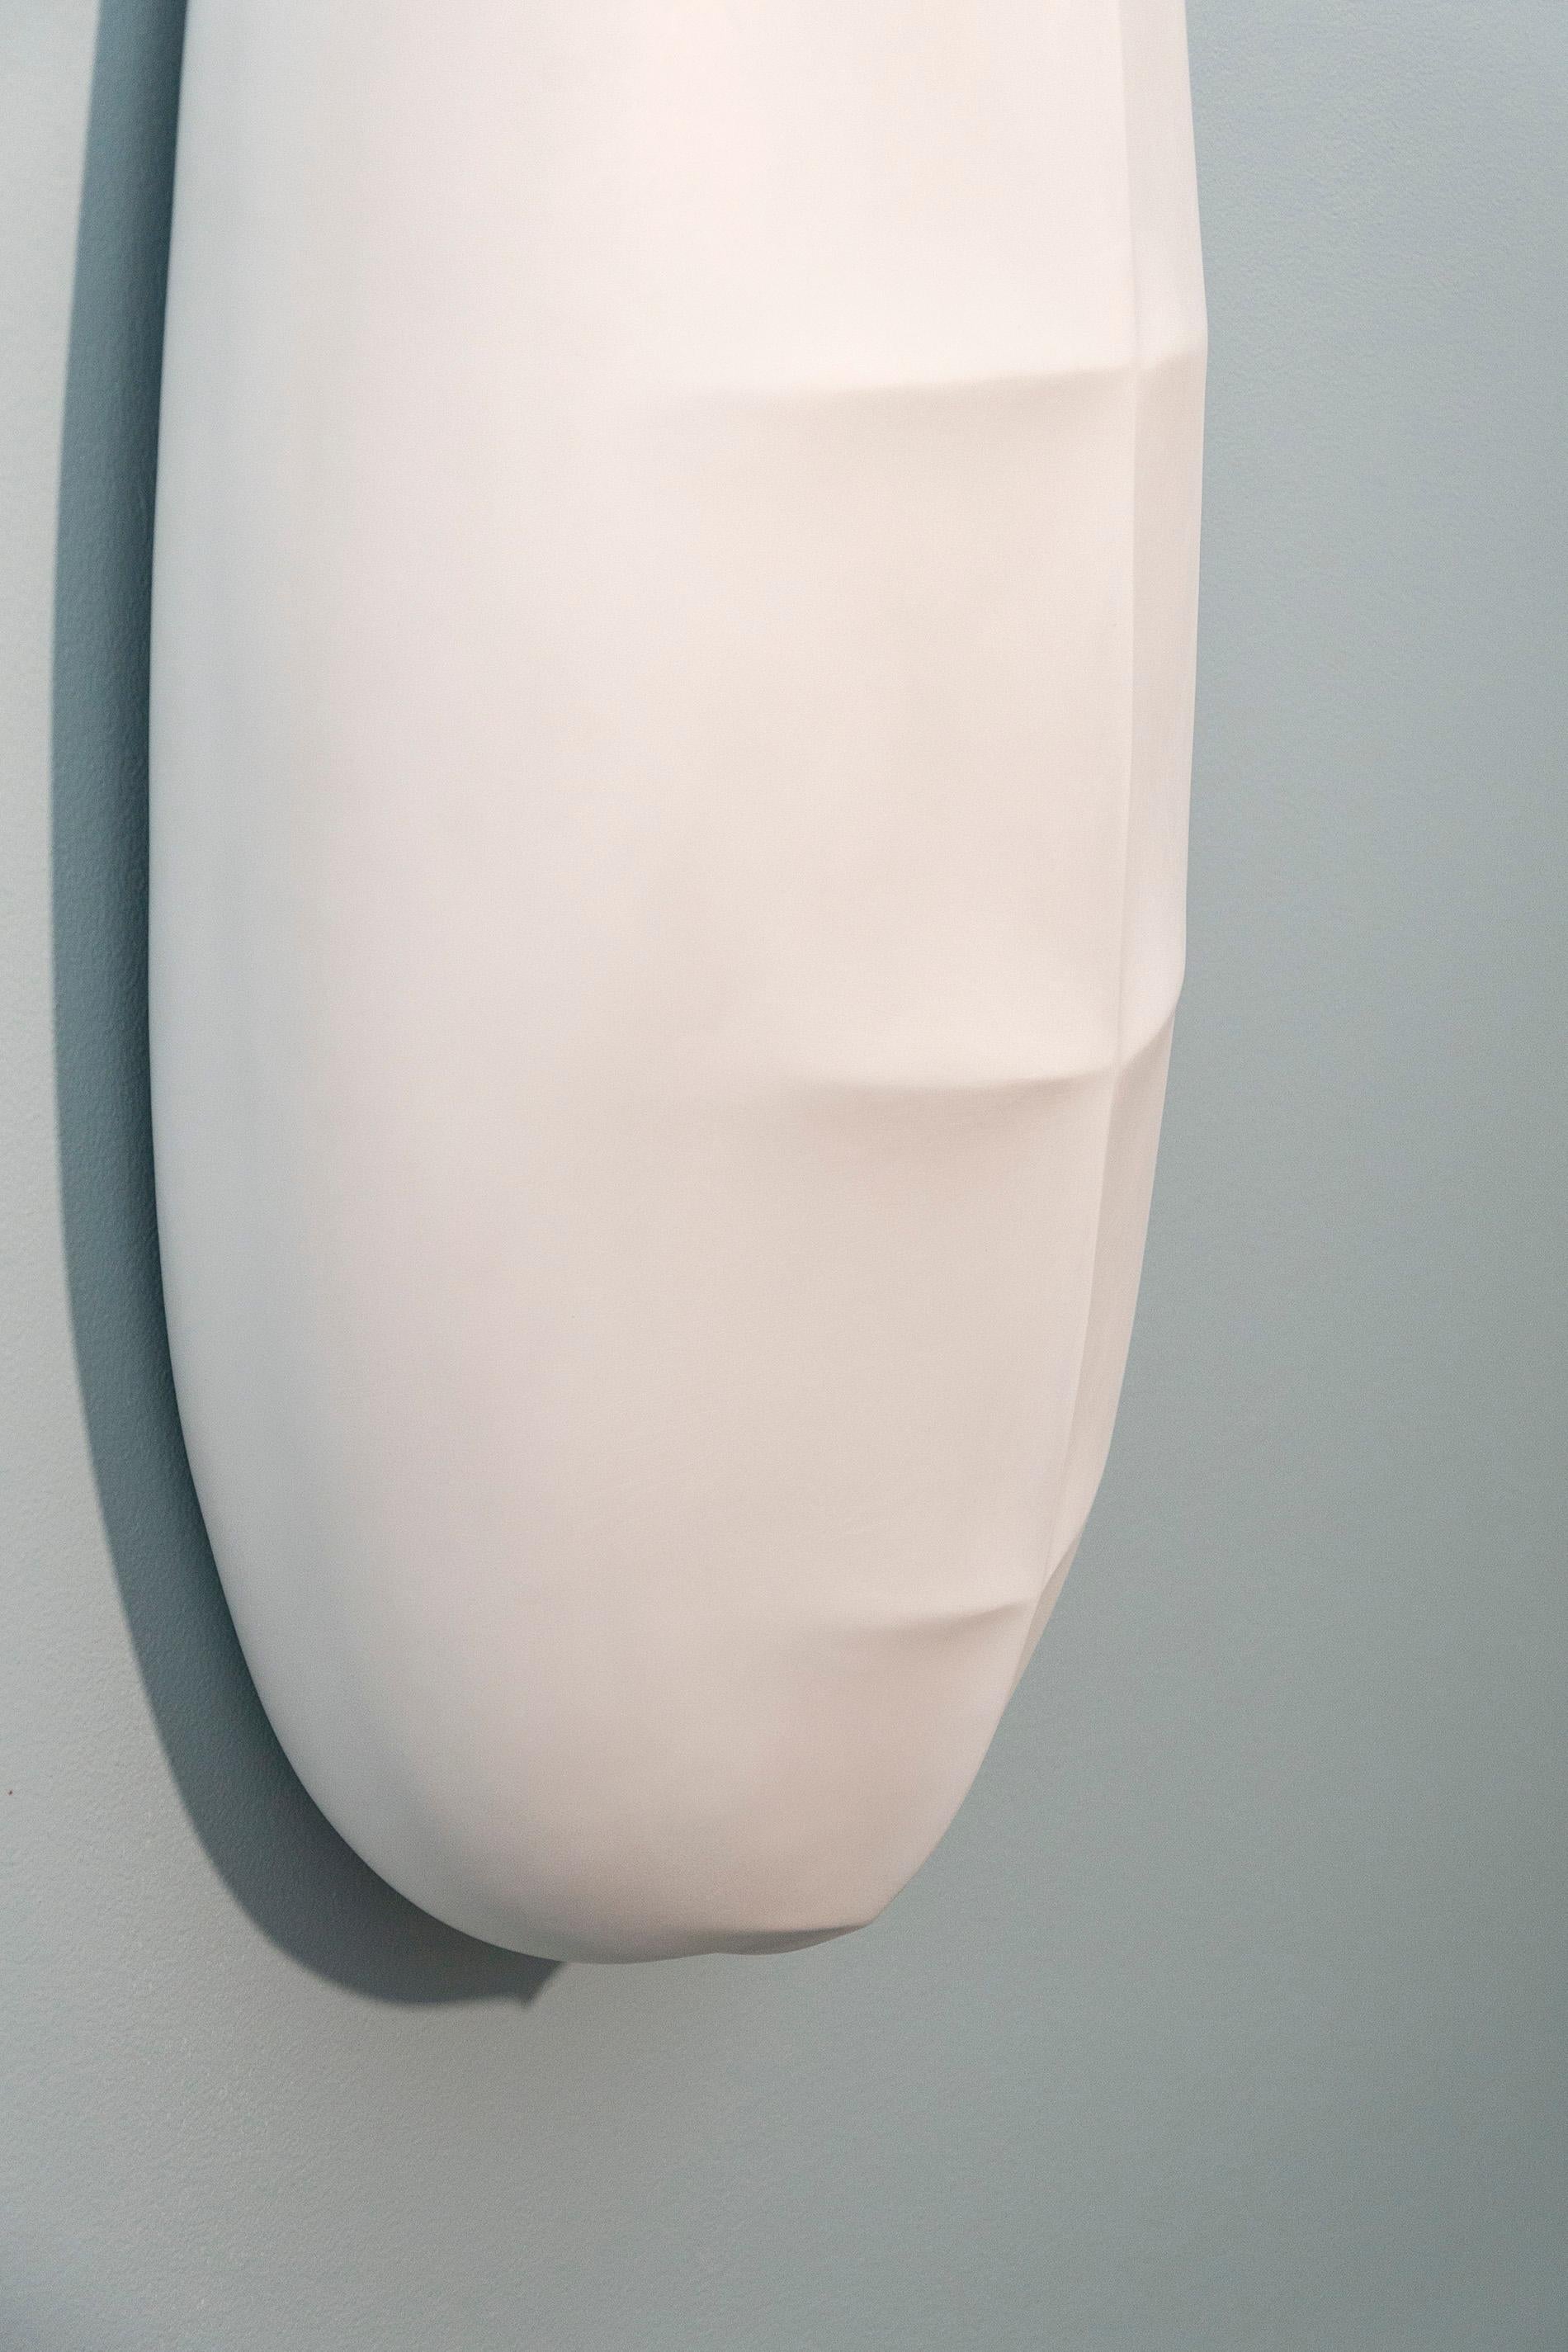 Biomorphic No 4 - white, minimalist, abstract, Venetian plaster wall sculpture - Contemporary Sculpture by Jana Osterman